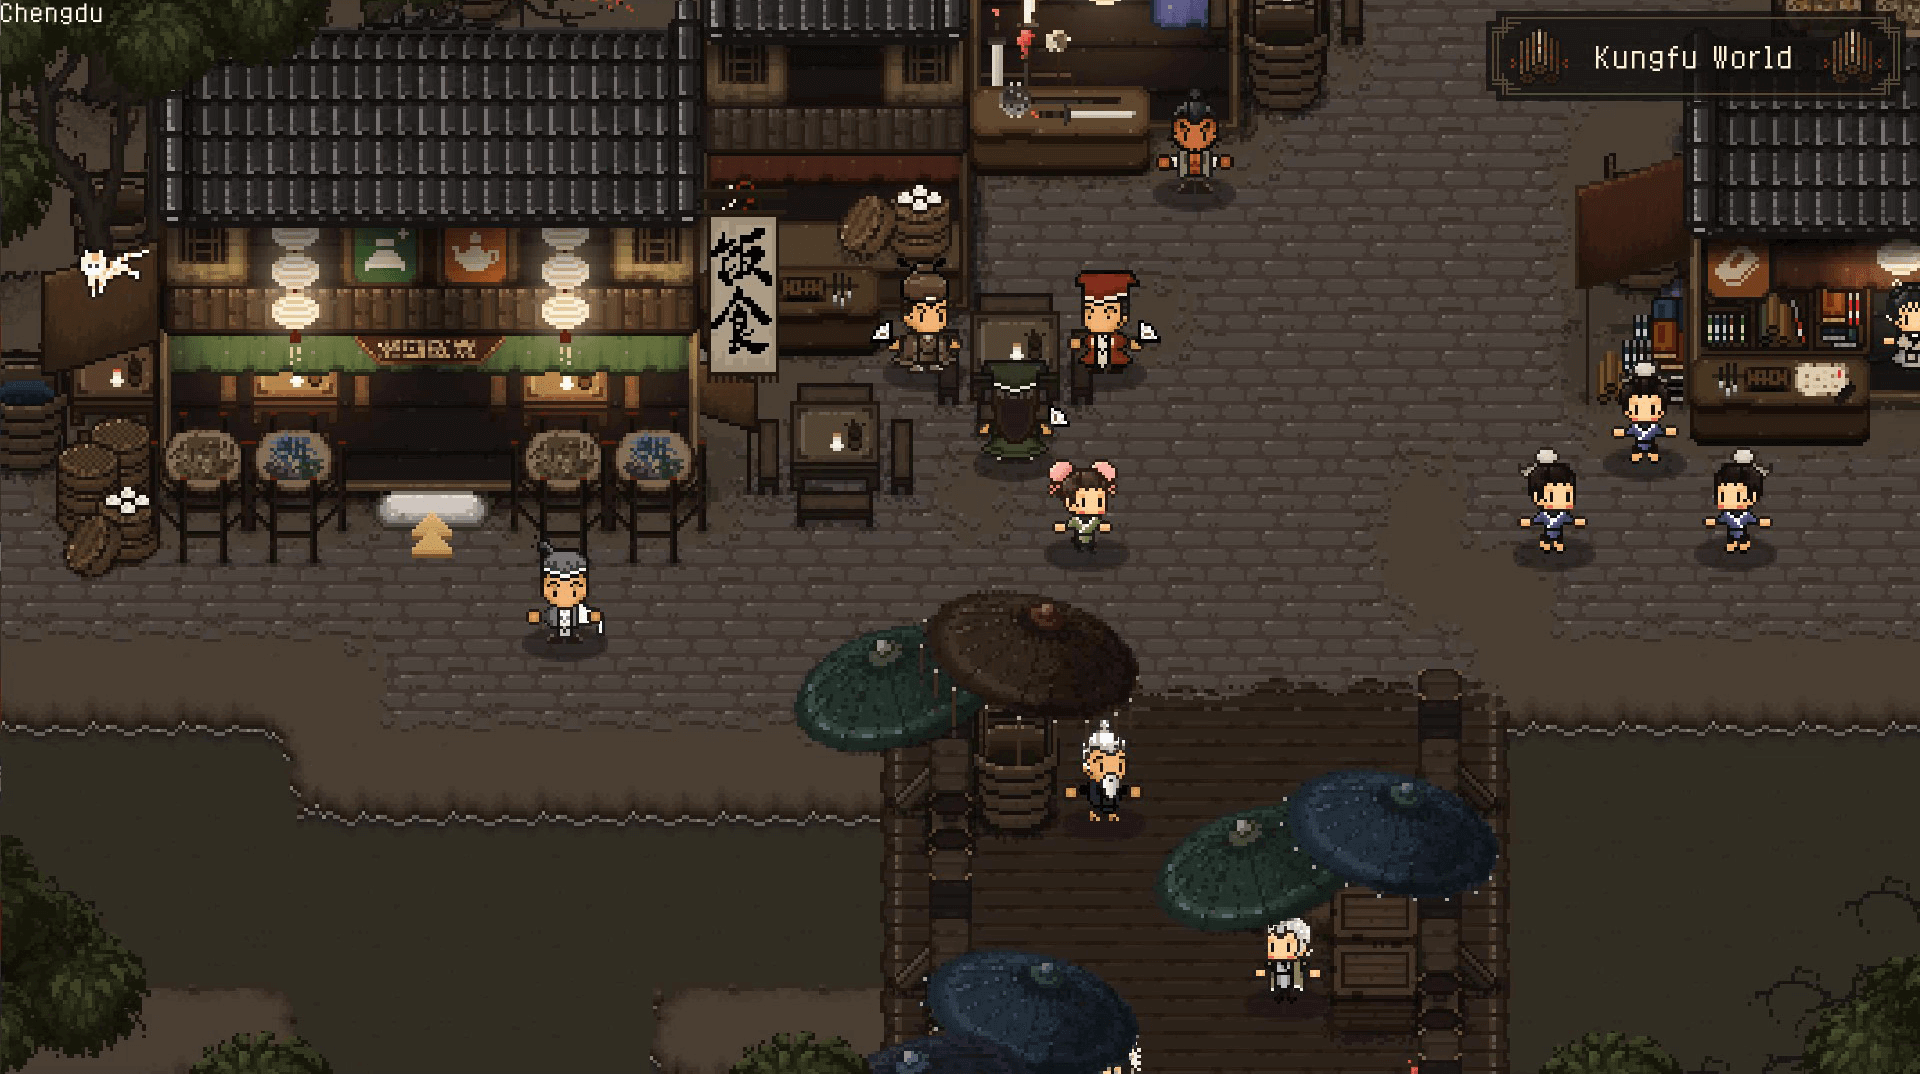 Bustling riverside city in the wuxia world with abundant NPC interactions and diverse locations like inns and shops